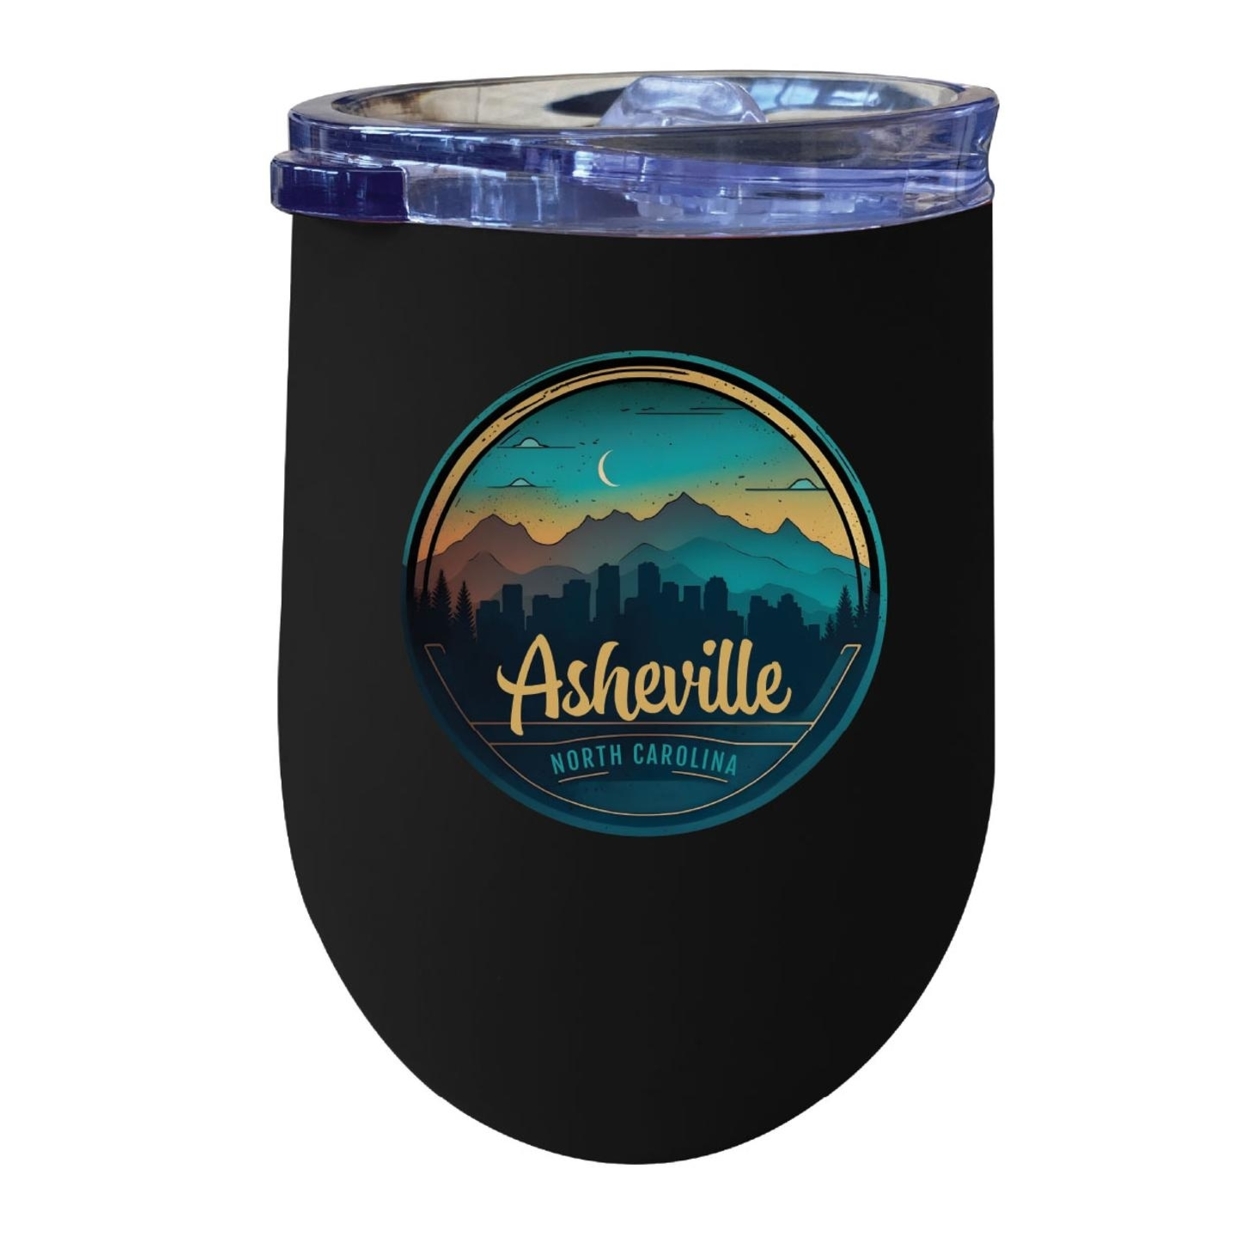 Asheville North Carolina Souvenir 12 Oz Insulated Wine Stainless Steel Tumbler - Rose Gold